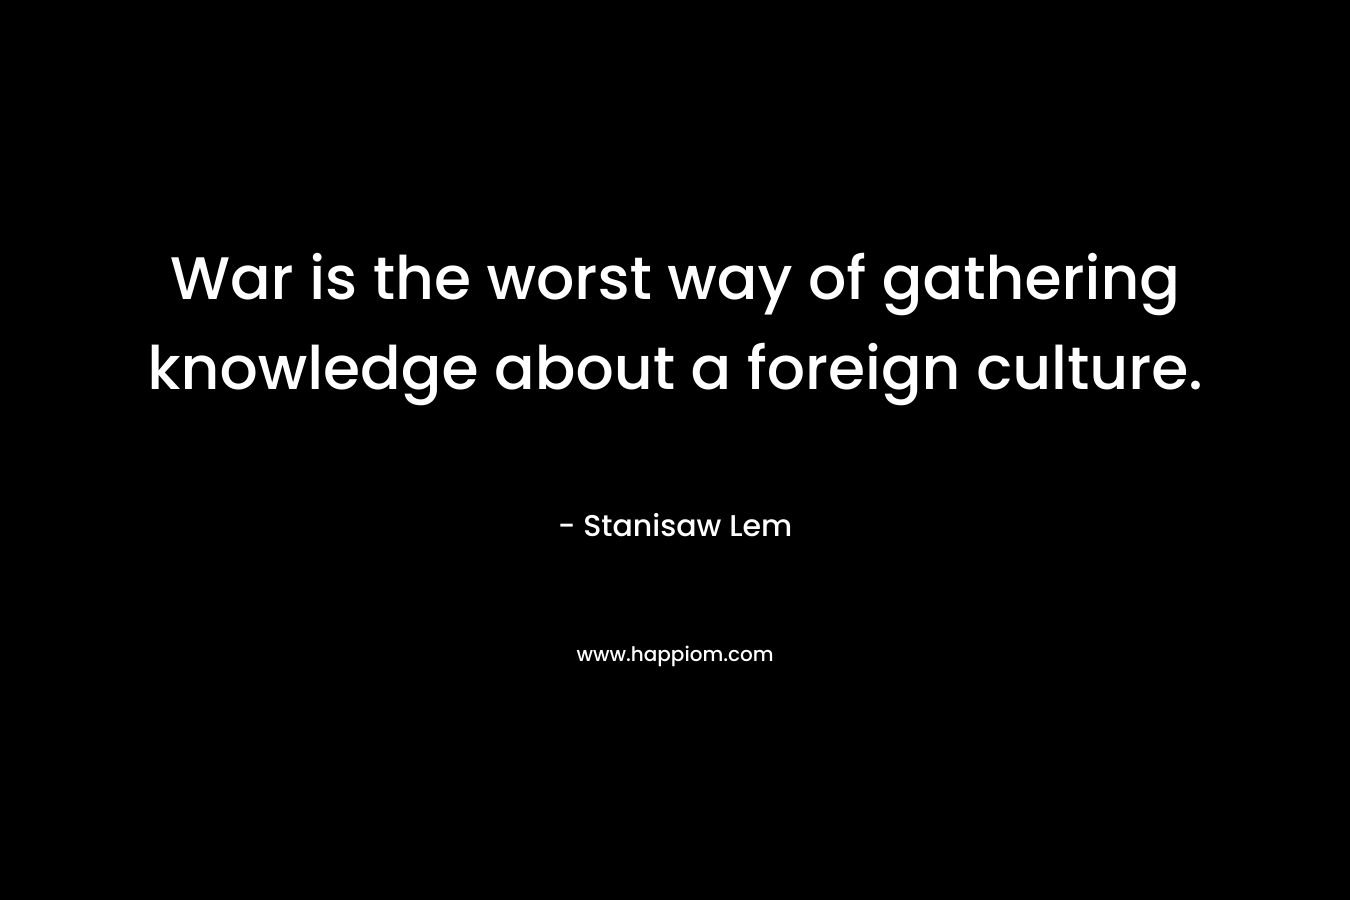 War is the worst way of gathering knowledge about a foreign culture. – Stanisaw Lem